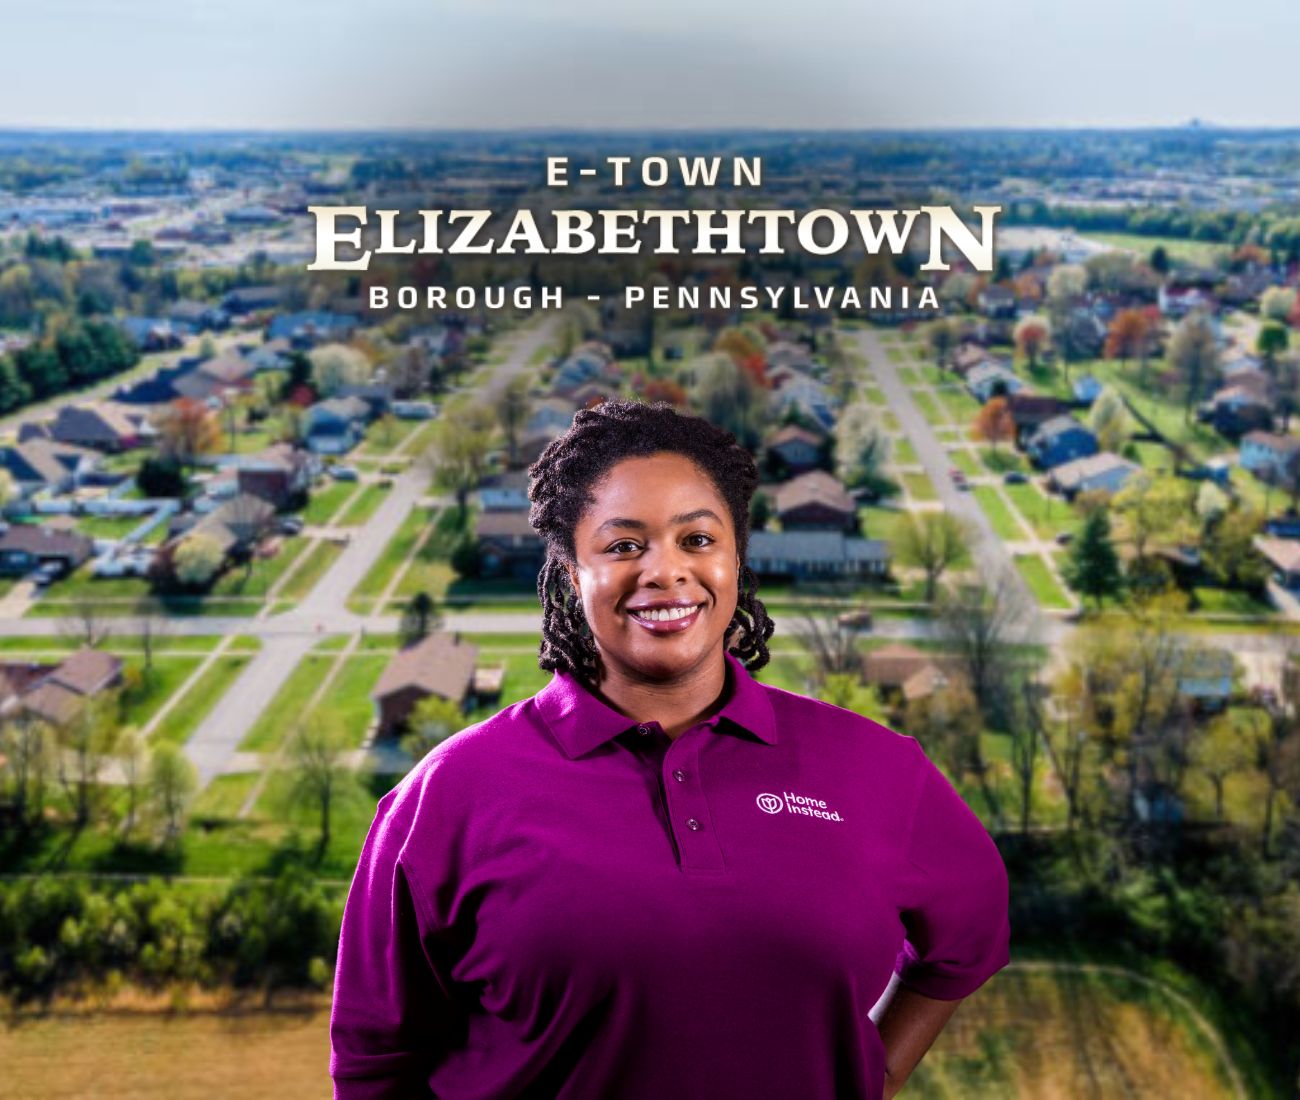 Home Instead caregiver with Elizabethtown Pennsylvania in the background